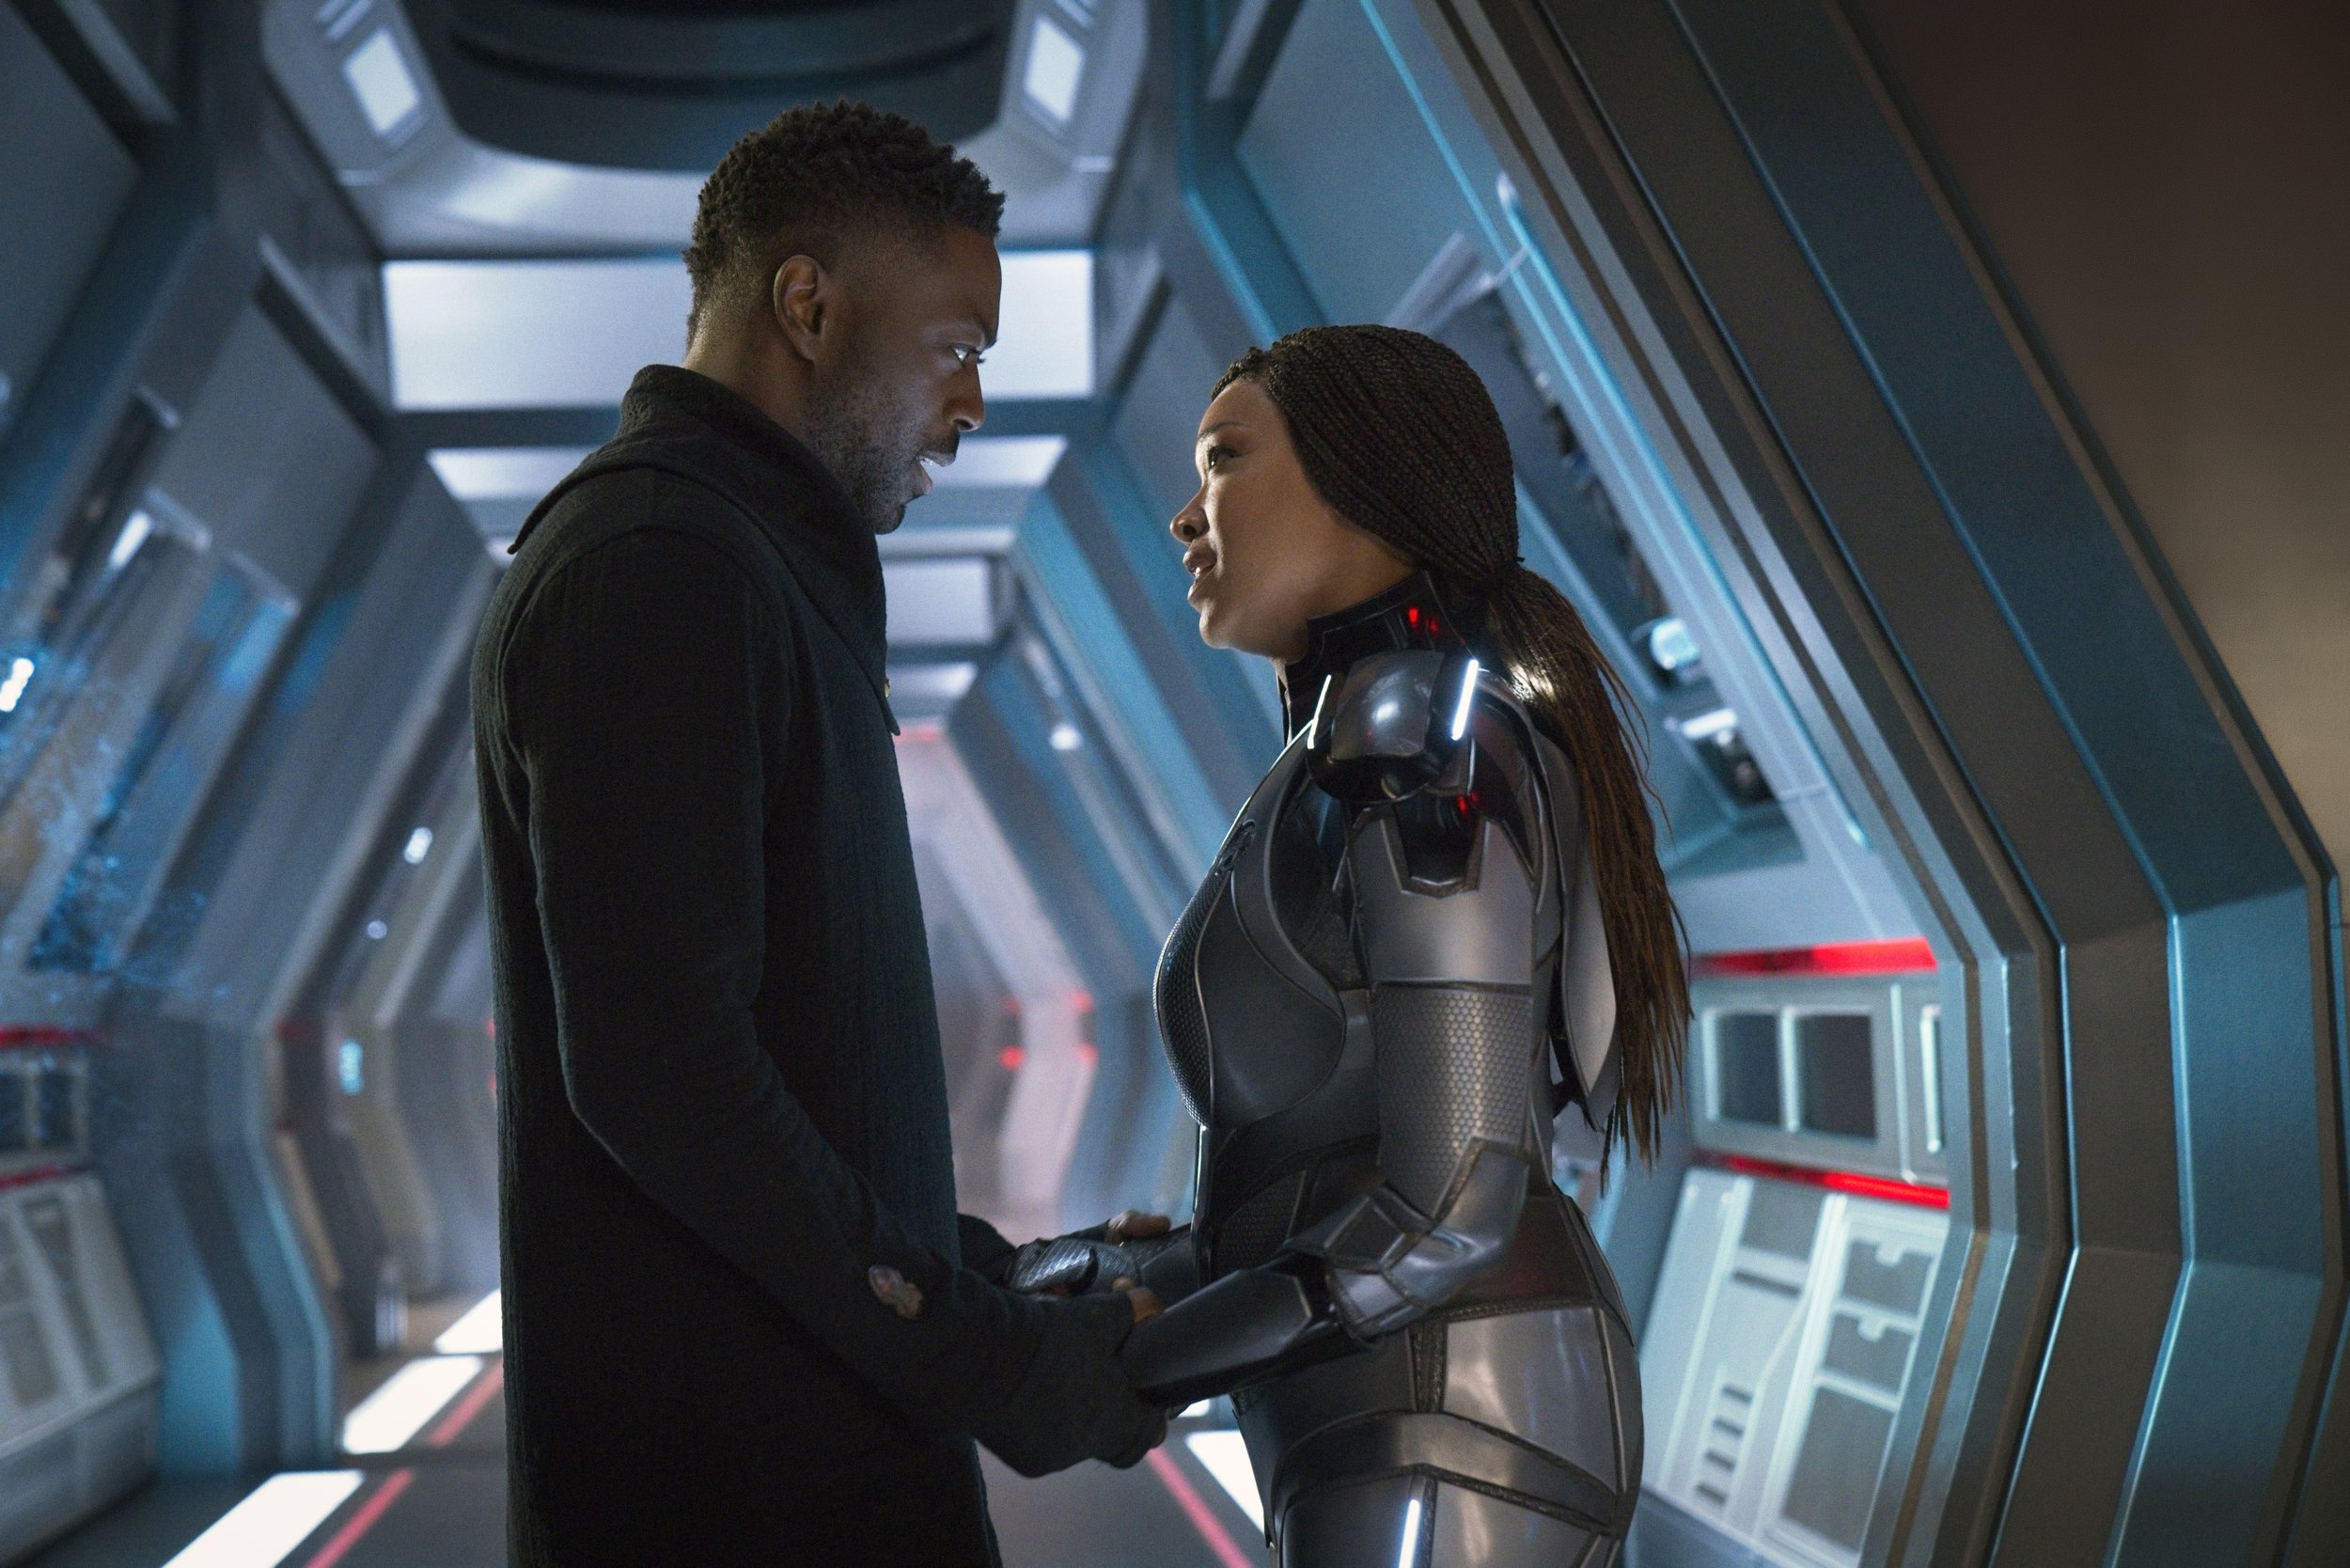   Pictured: David Ajala as Book and Sonequa Martin Green as Burnham of the Paramount+ original series STAR TREK: DISCOVERY. Photo Cr: Michael Gibson/Paramount+ (C) 2021 CBS Interactive. All Rights Reserved.  